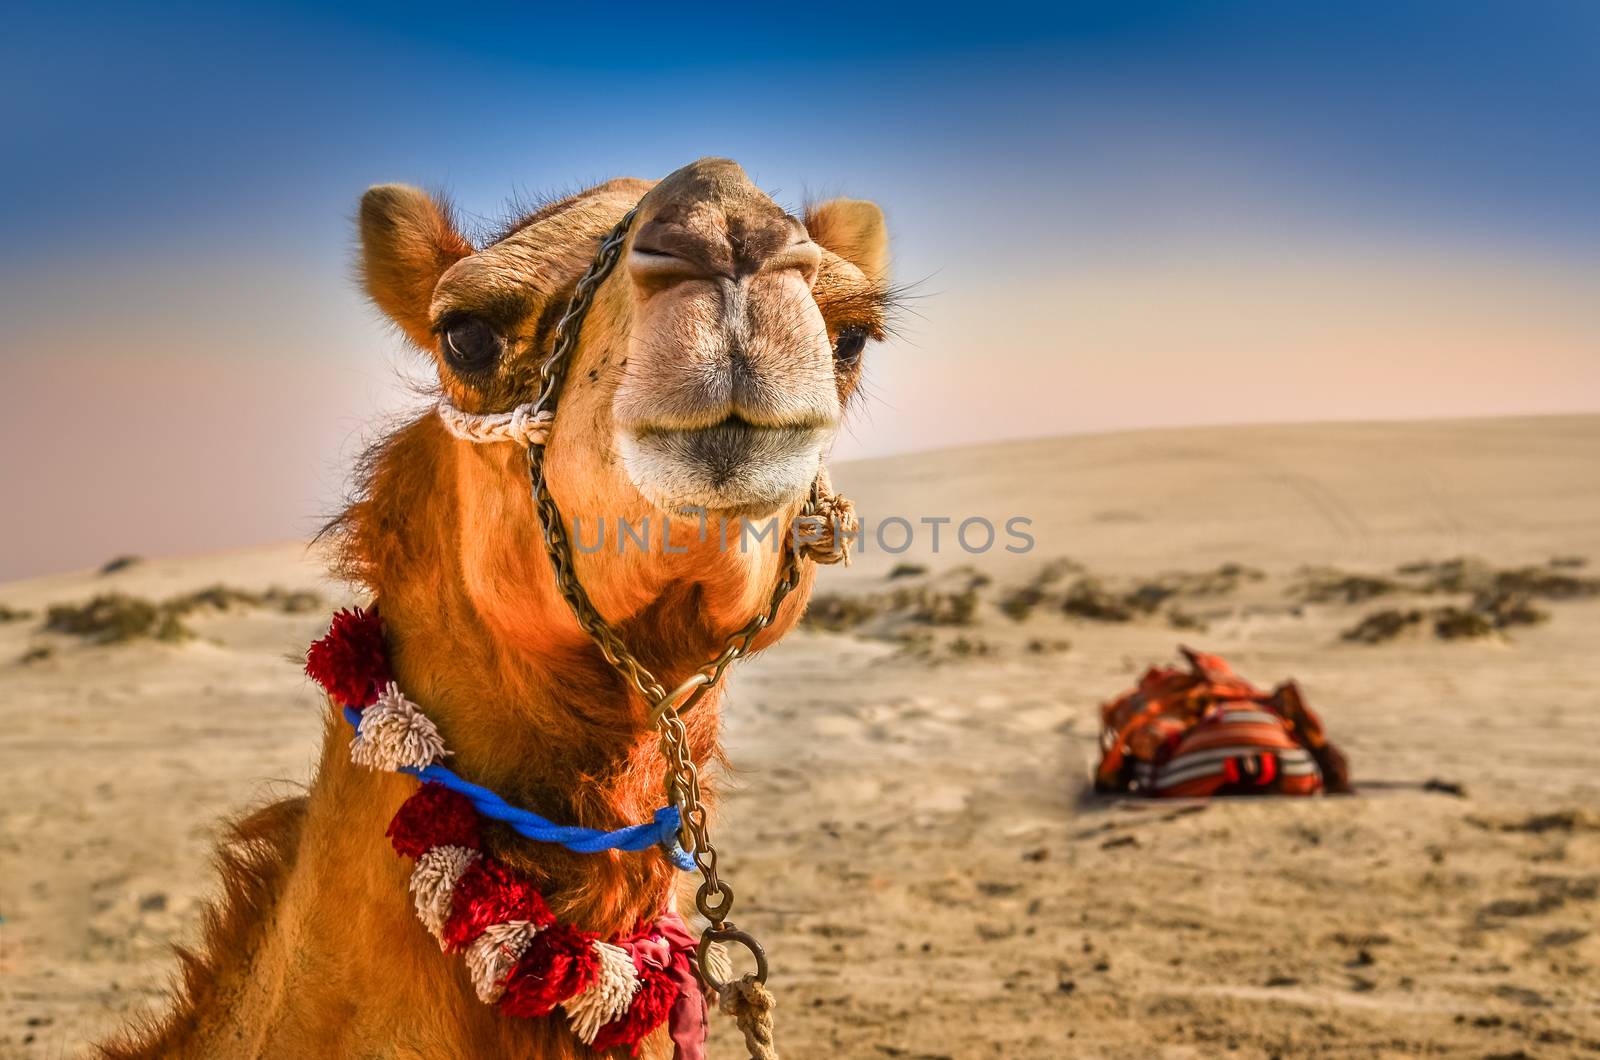 Detail of camel's head in the desert with funny expresion